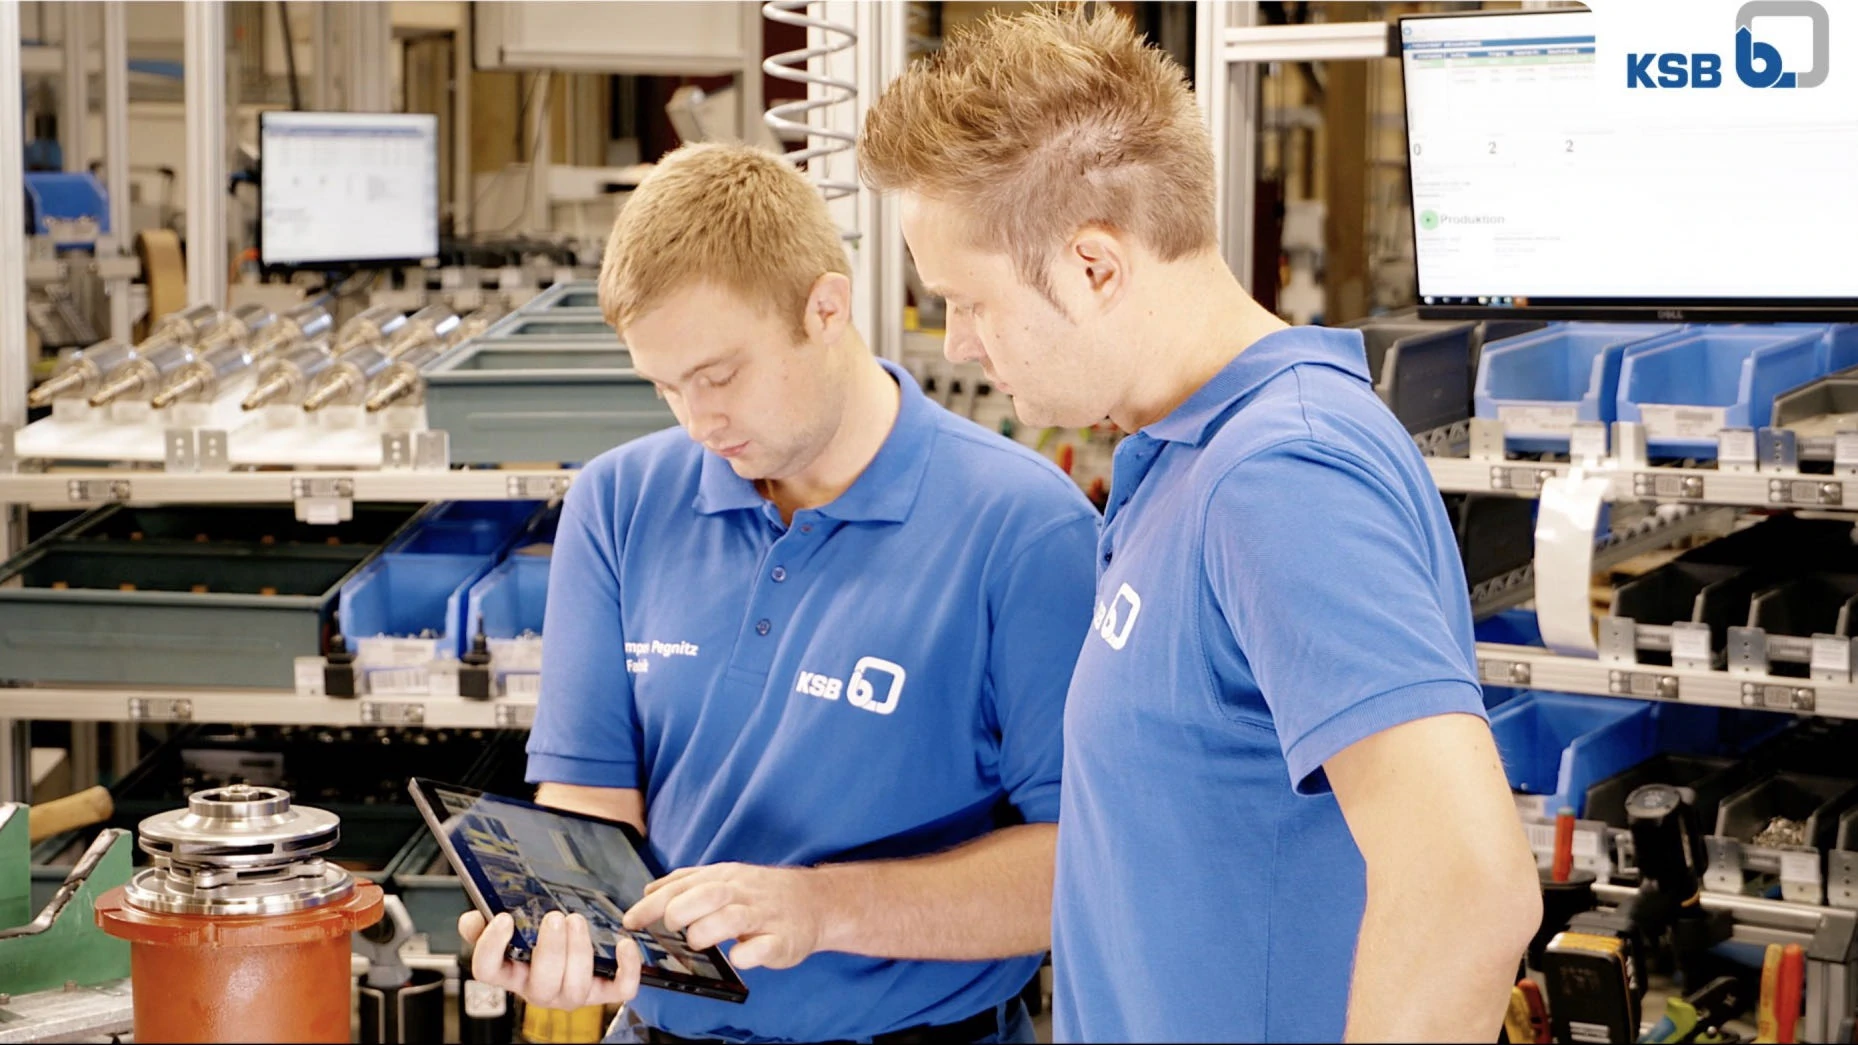 Pump manufacturer KSB digitized its entire production and logistics with NEONEX and achieved major efficiency gains as a result. In the webinar, both the realized use cases and the general approach will be presented.